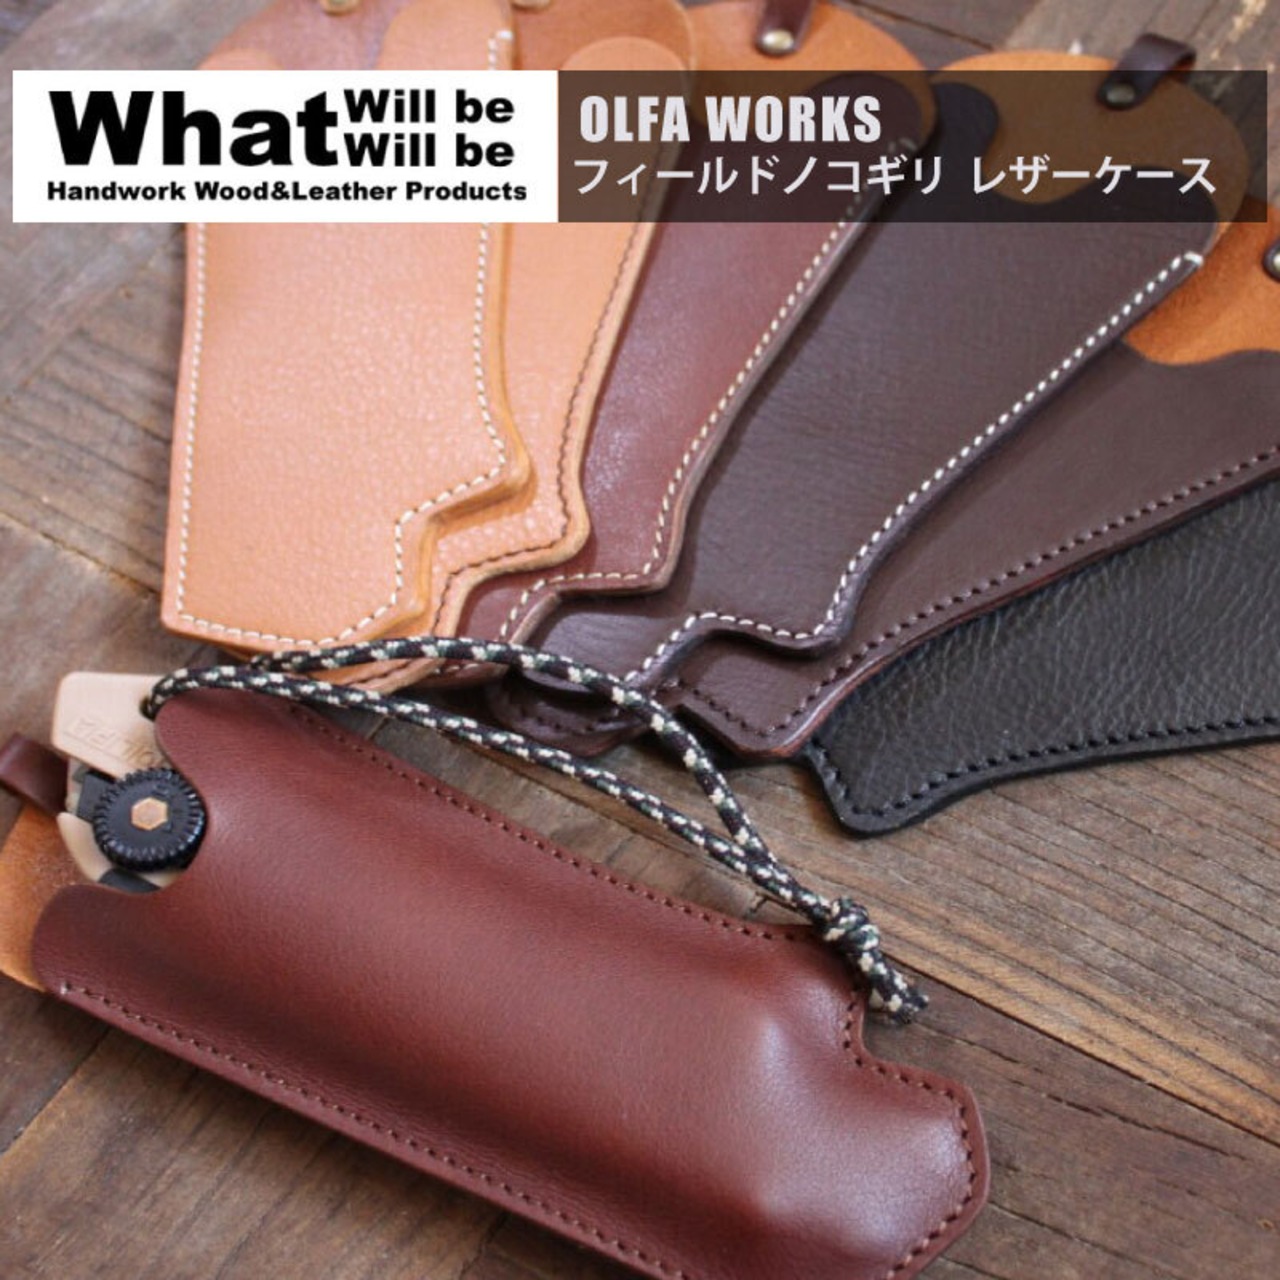 What will be will be OLFA WORKS フィールド ノコギリ レザー ケース